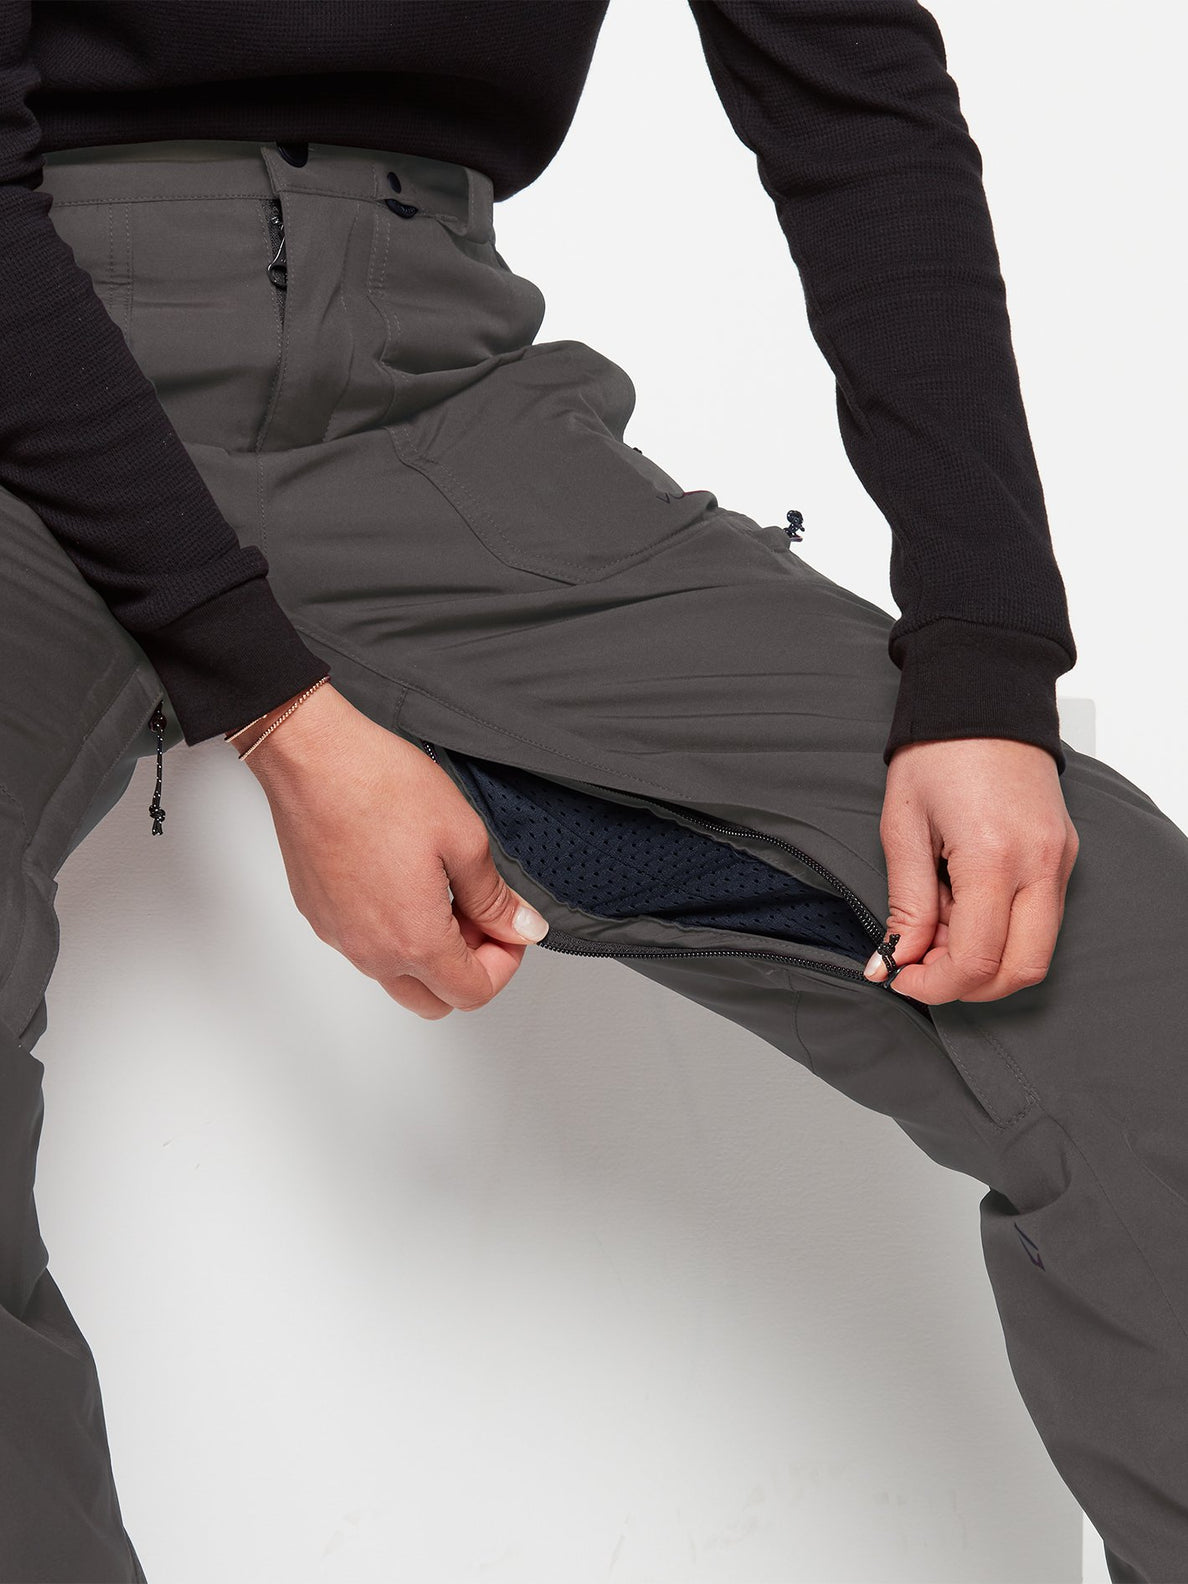 Knox Insulated Gore-Tex Trousers - DARK GREY (H1252200_DGR) [20]